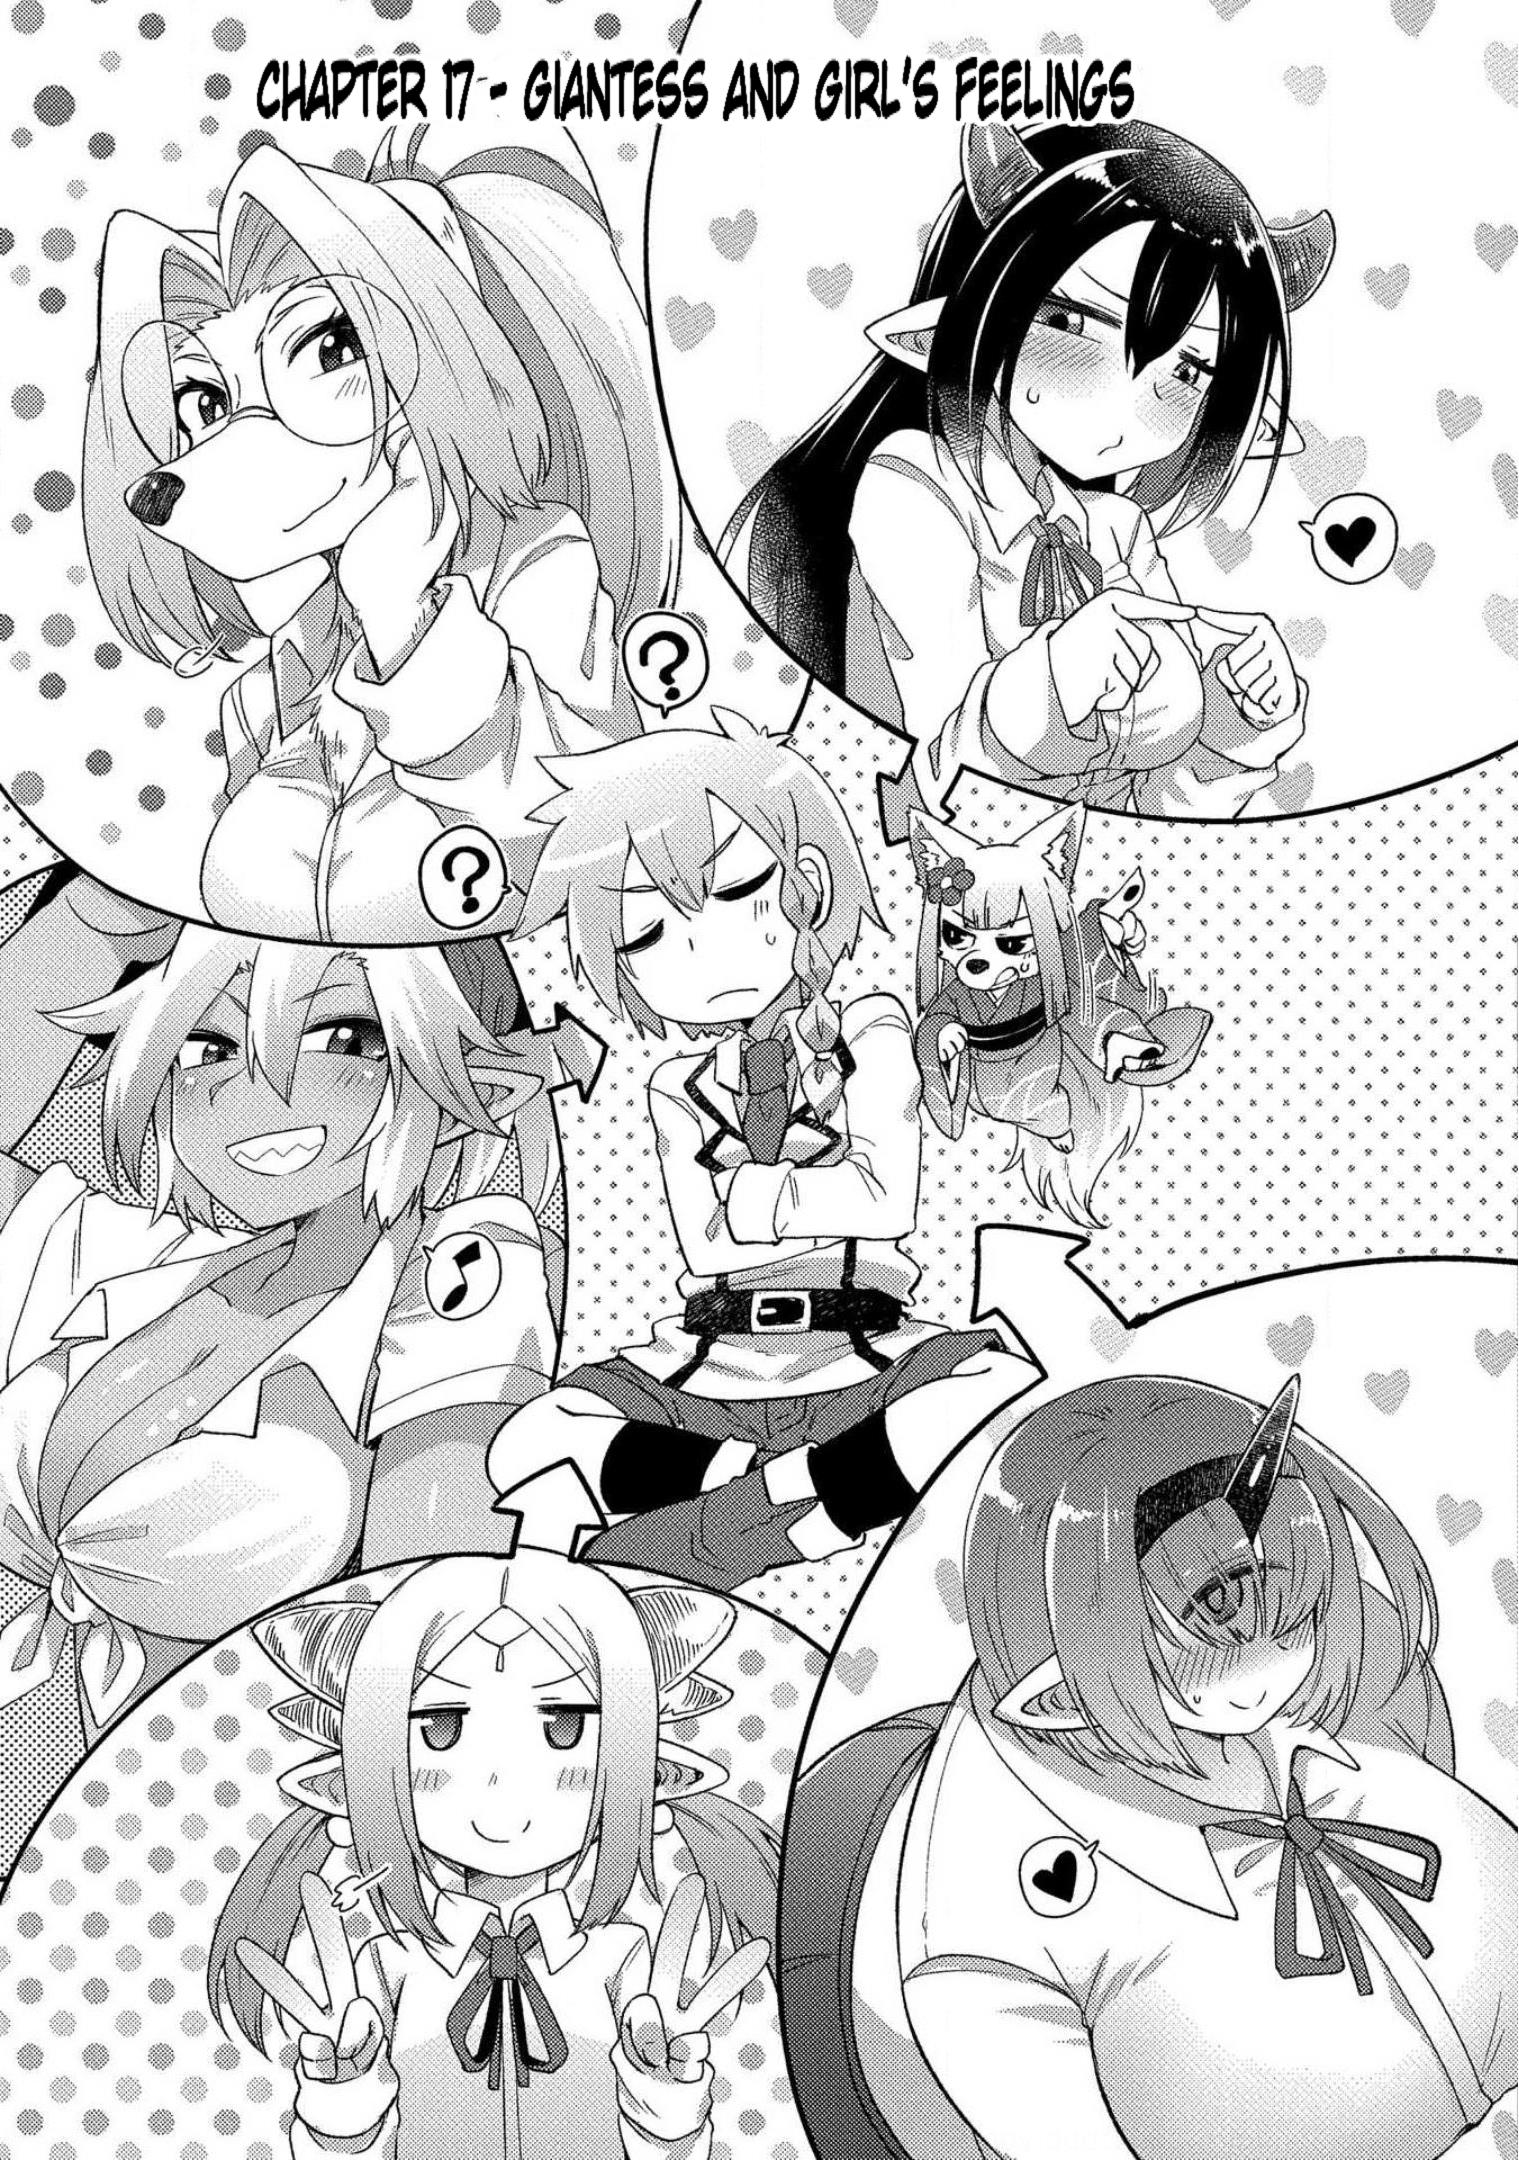 Oversized Sextet Vol.3 Chapter 17: Giantess And Girl's Feelings - Picture 3